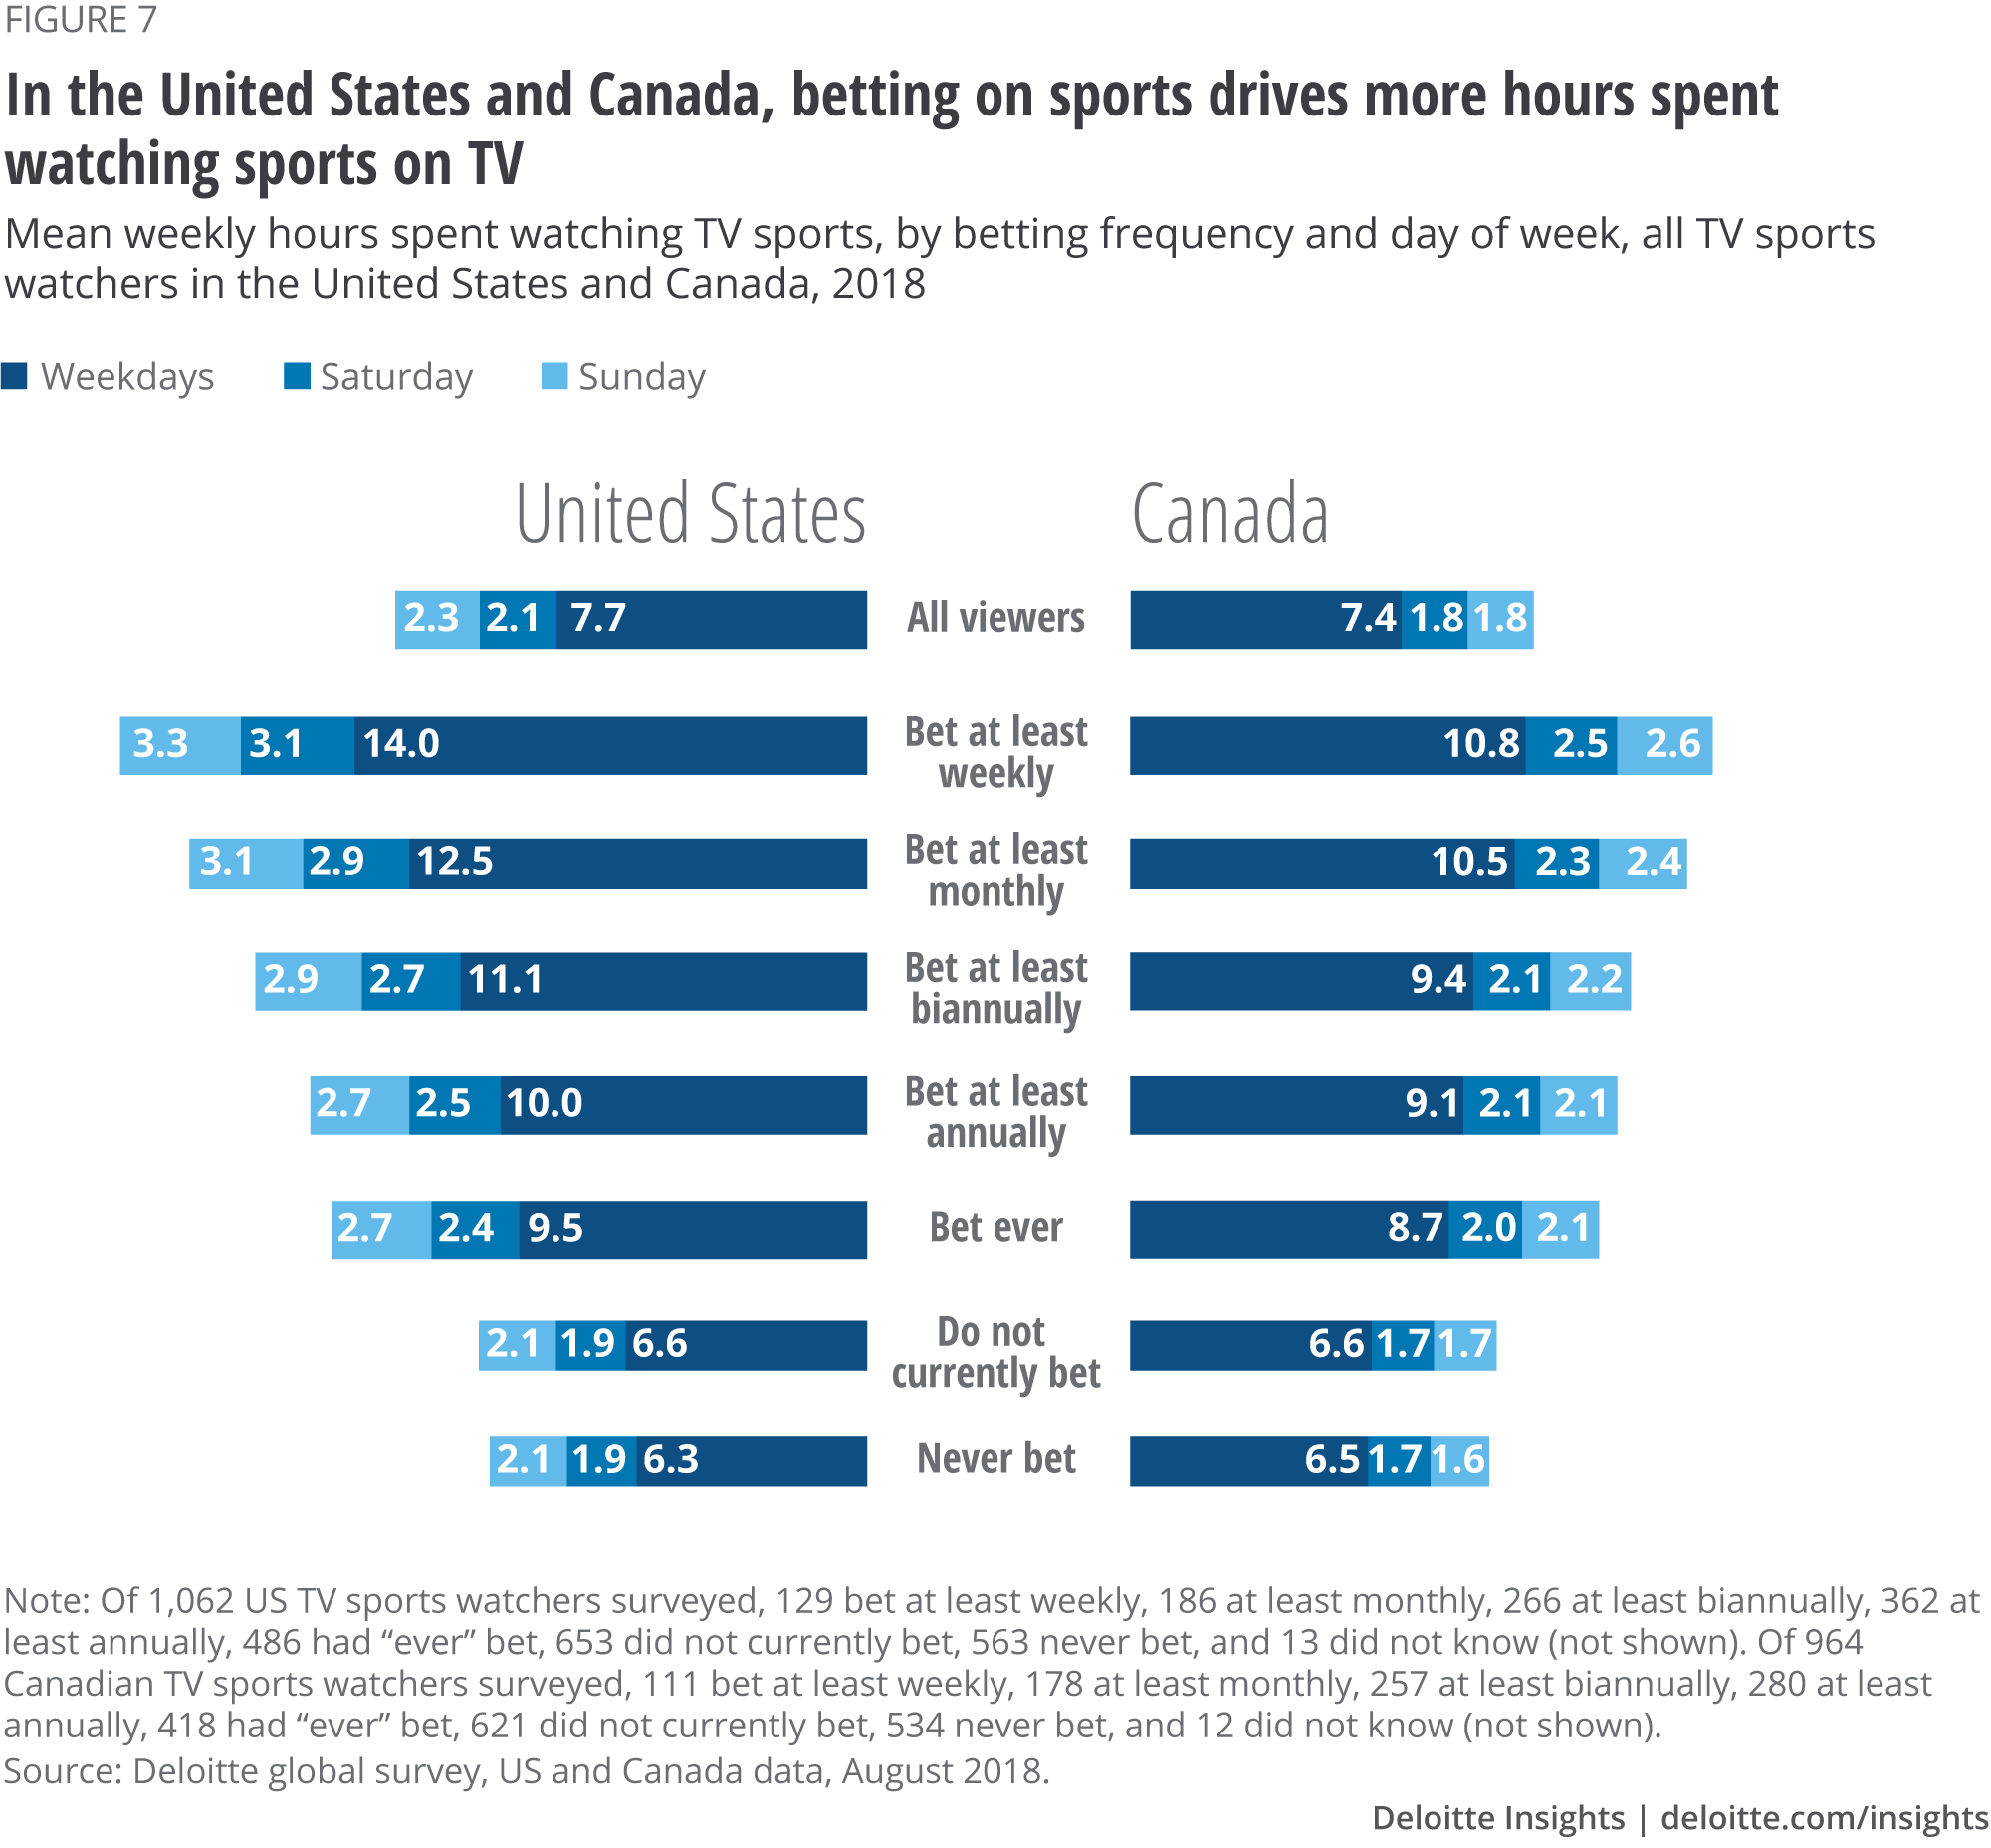 In the United States and Canada, betting on sports drives more hours spent watching sports on TV